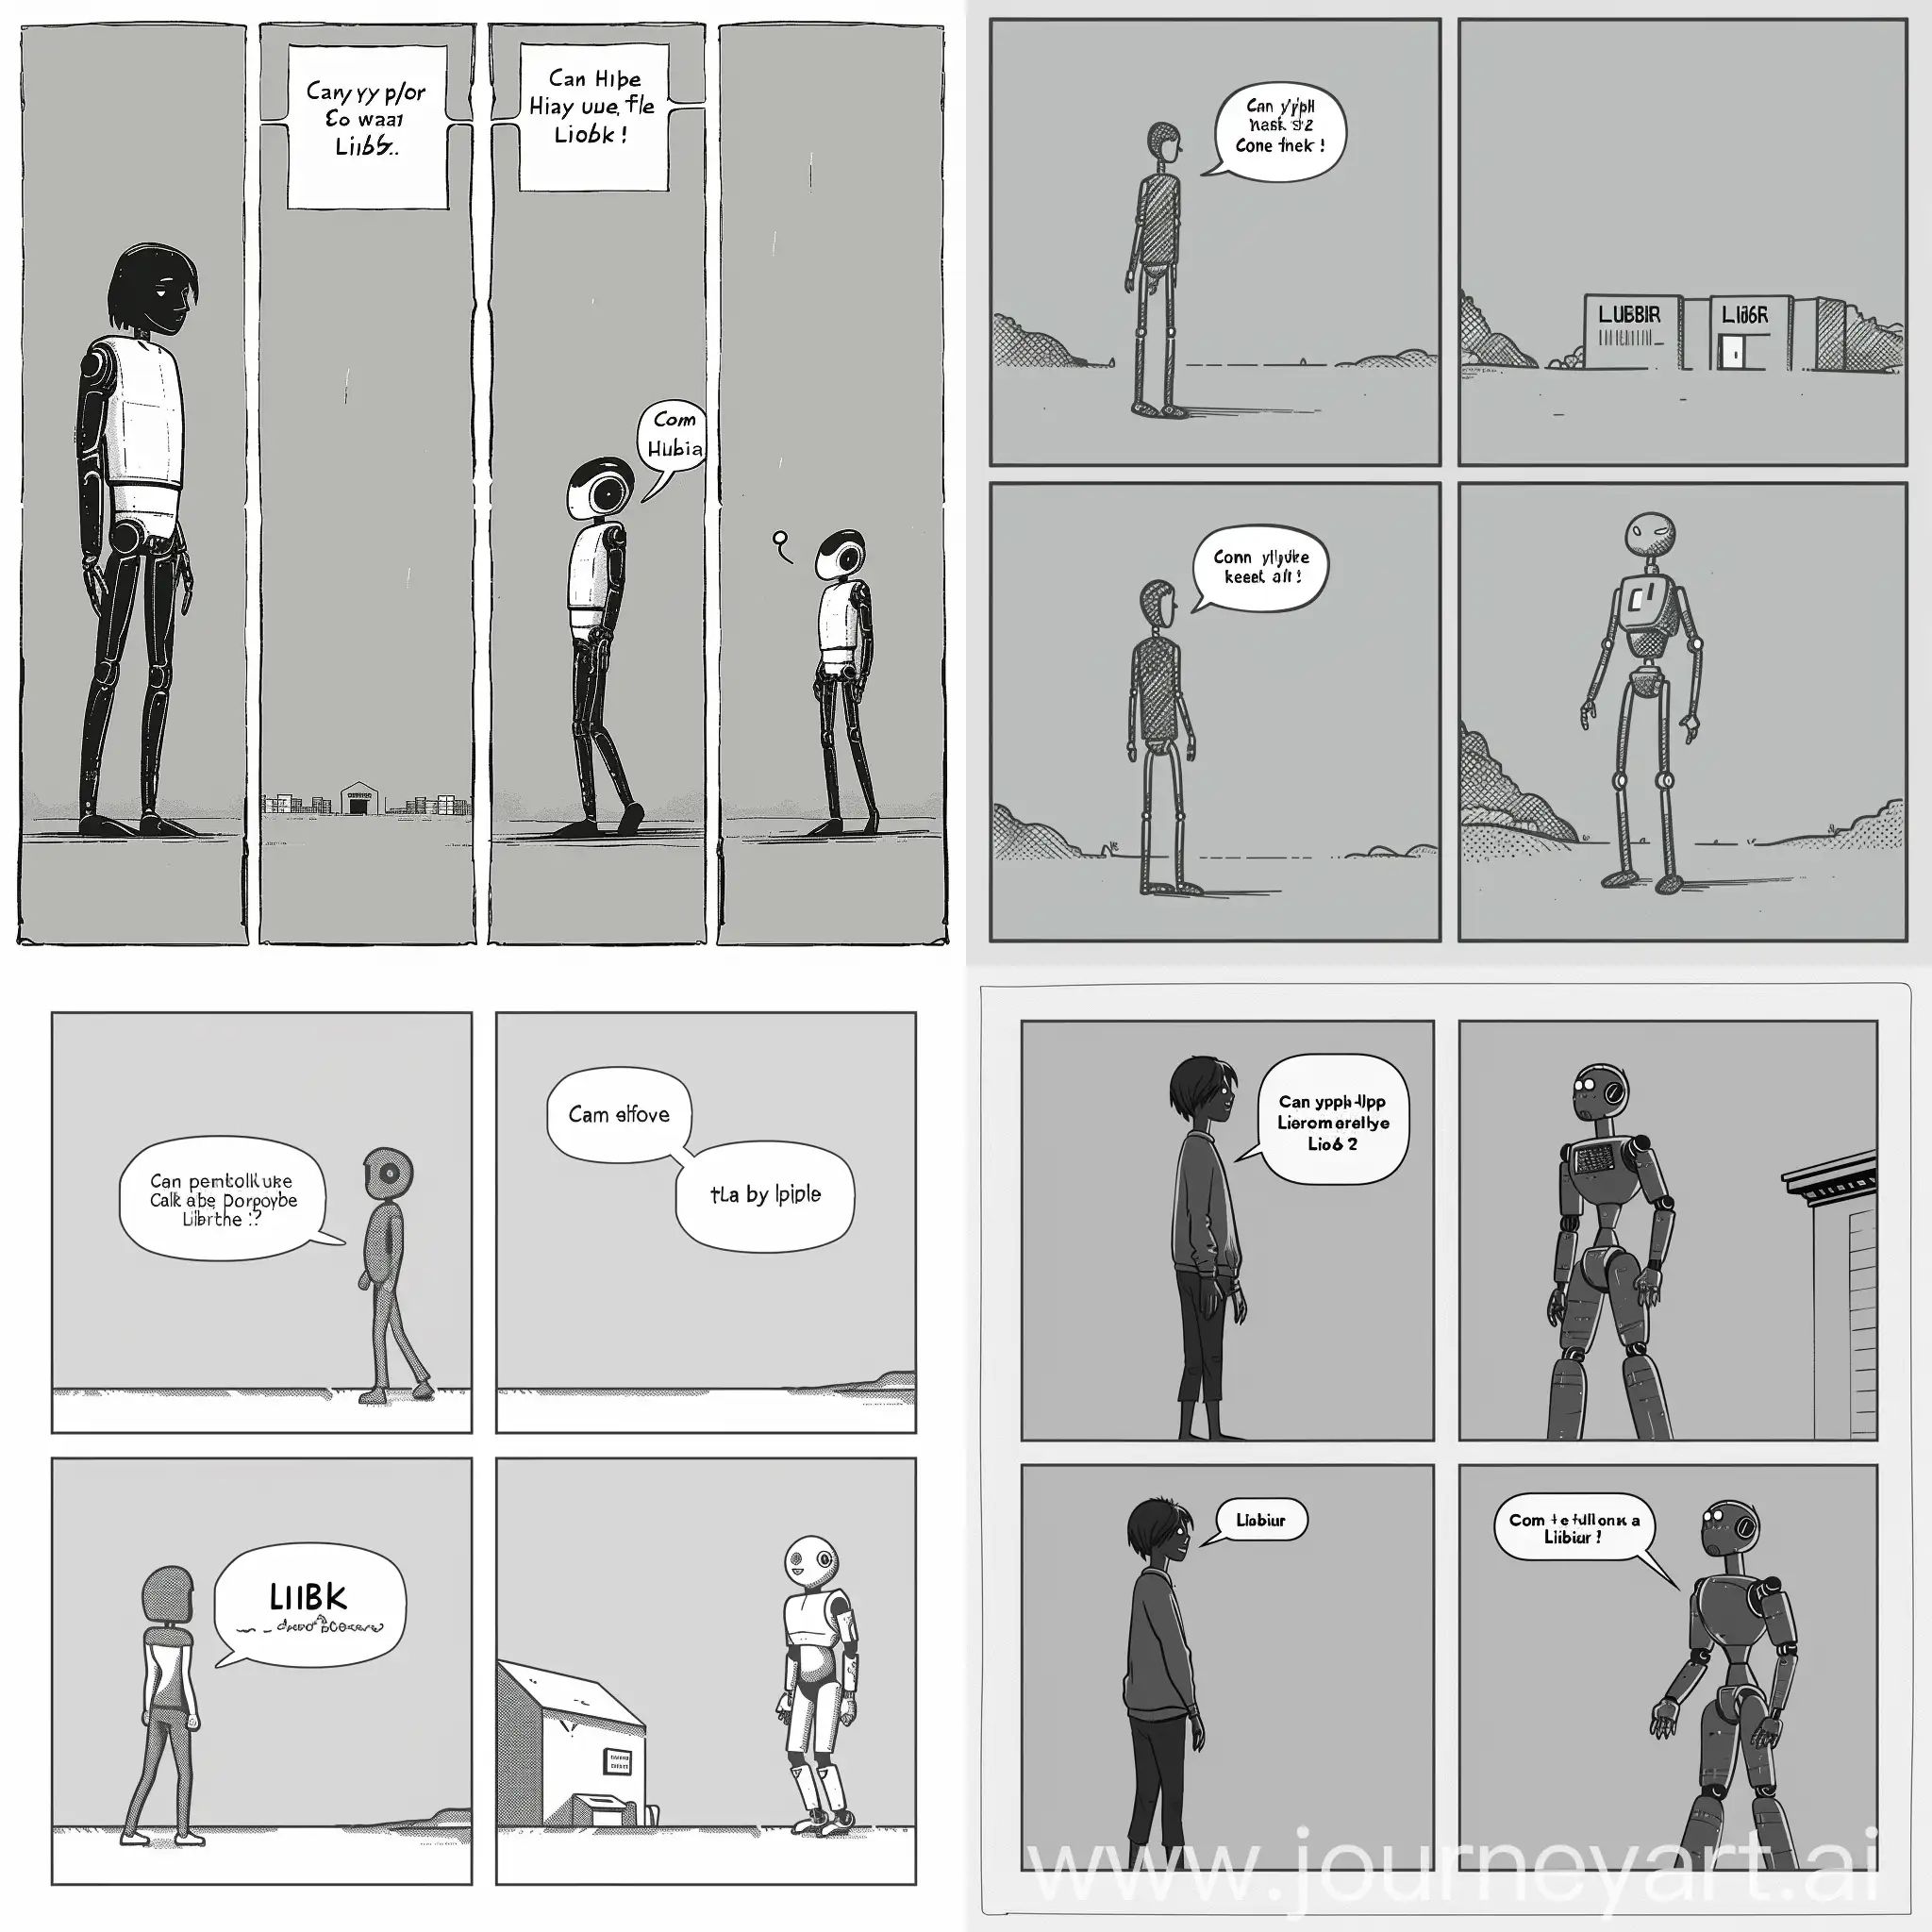 A 4-panel black and white vector comic with horizontally long panels stacked vertically. Use a simple, minimalist style with basic background details. Panel 1: A person stands facing a slightly taller robot with a friendly demeanor. A speech bubble above the person reads, "Can you help me find the library?" Panel 2: The robot walks purposefully forward with the person following slightly behind.  Panel 3: The person lags further behind the robot, looking a bit tired. The robot has turned its head back and a speech bubble shows it saying, "Come on, keep up!" Panel 4: The person and robot stand side-by-side in front of a simple building with a sign clearly marked "Library". Both have small smiles.